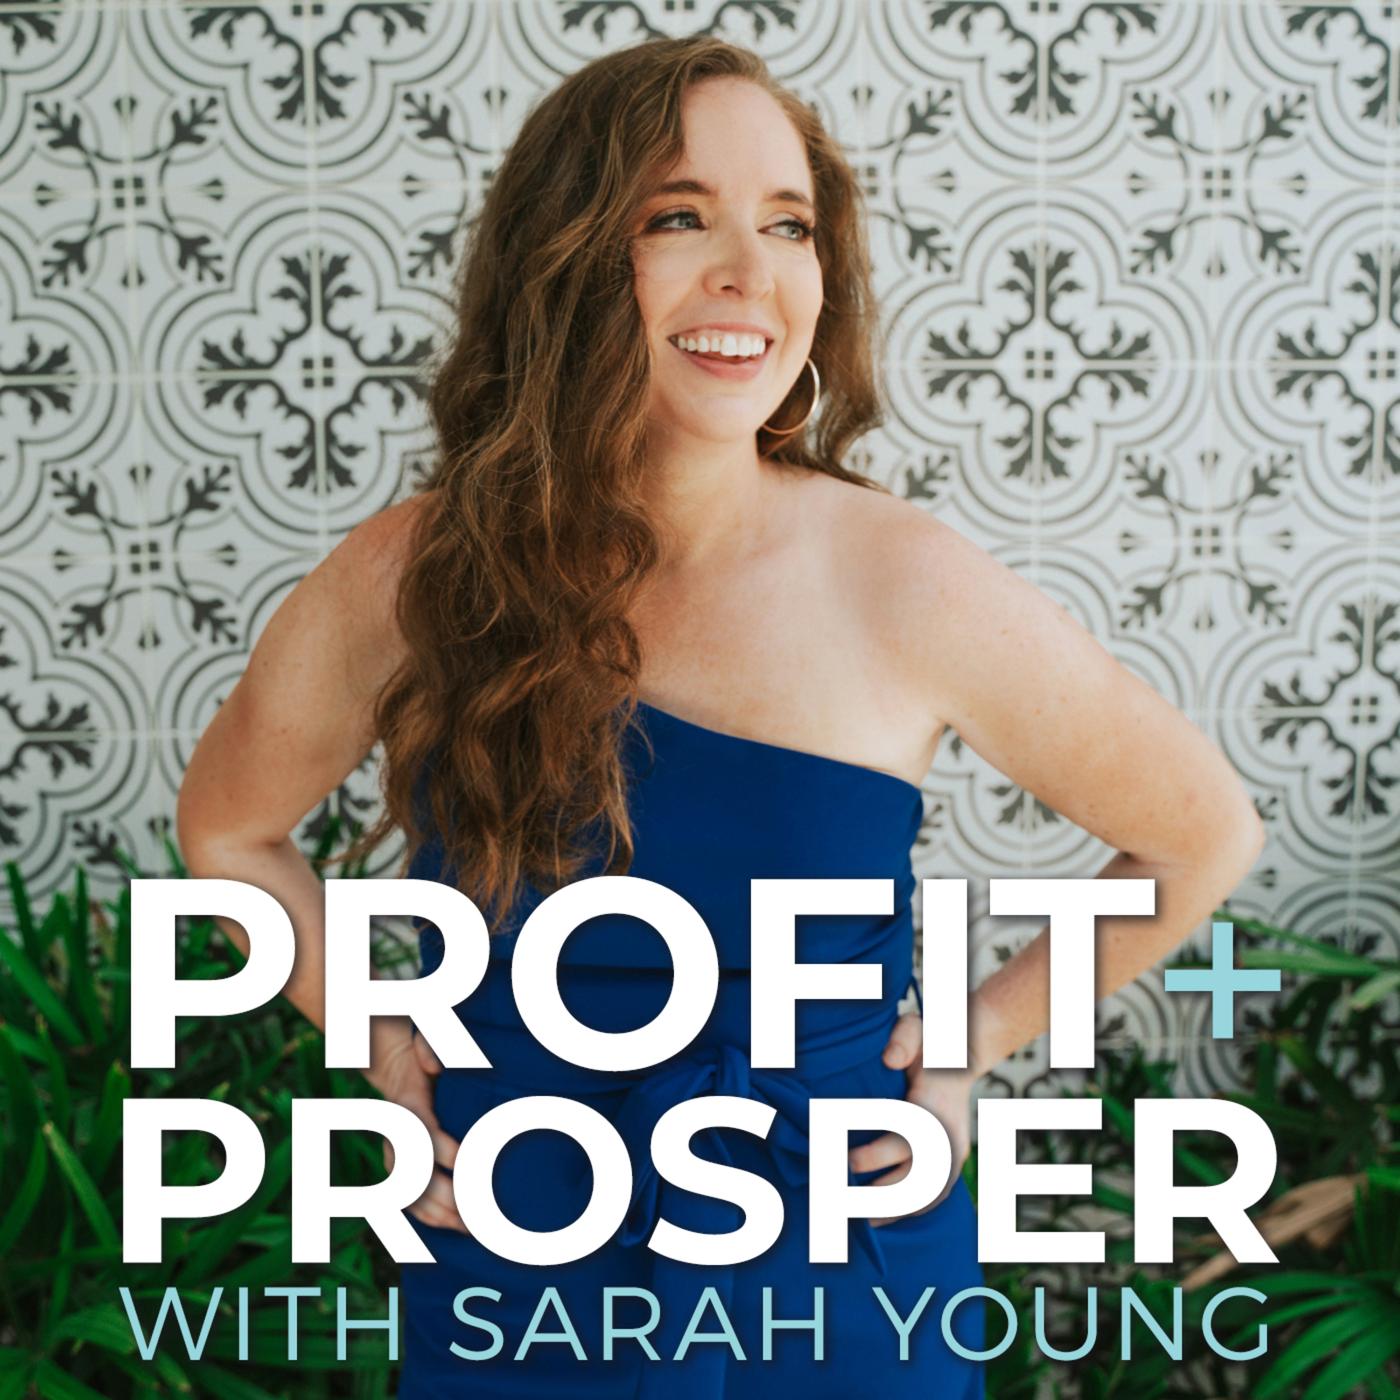 ashley lawrance recommends Best Of Sarah Young